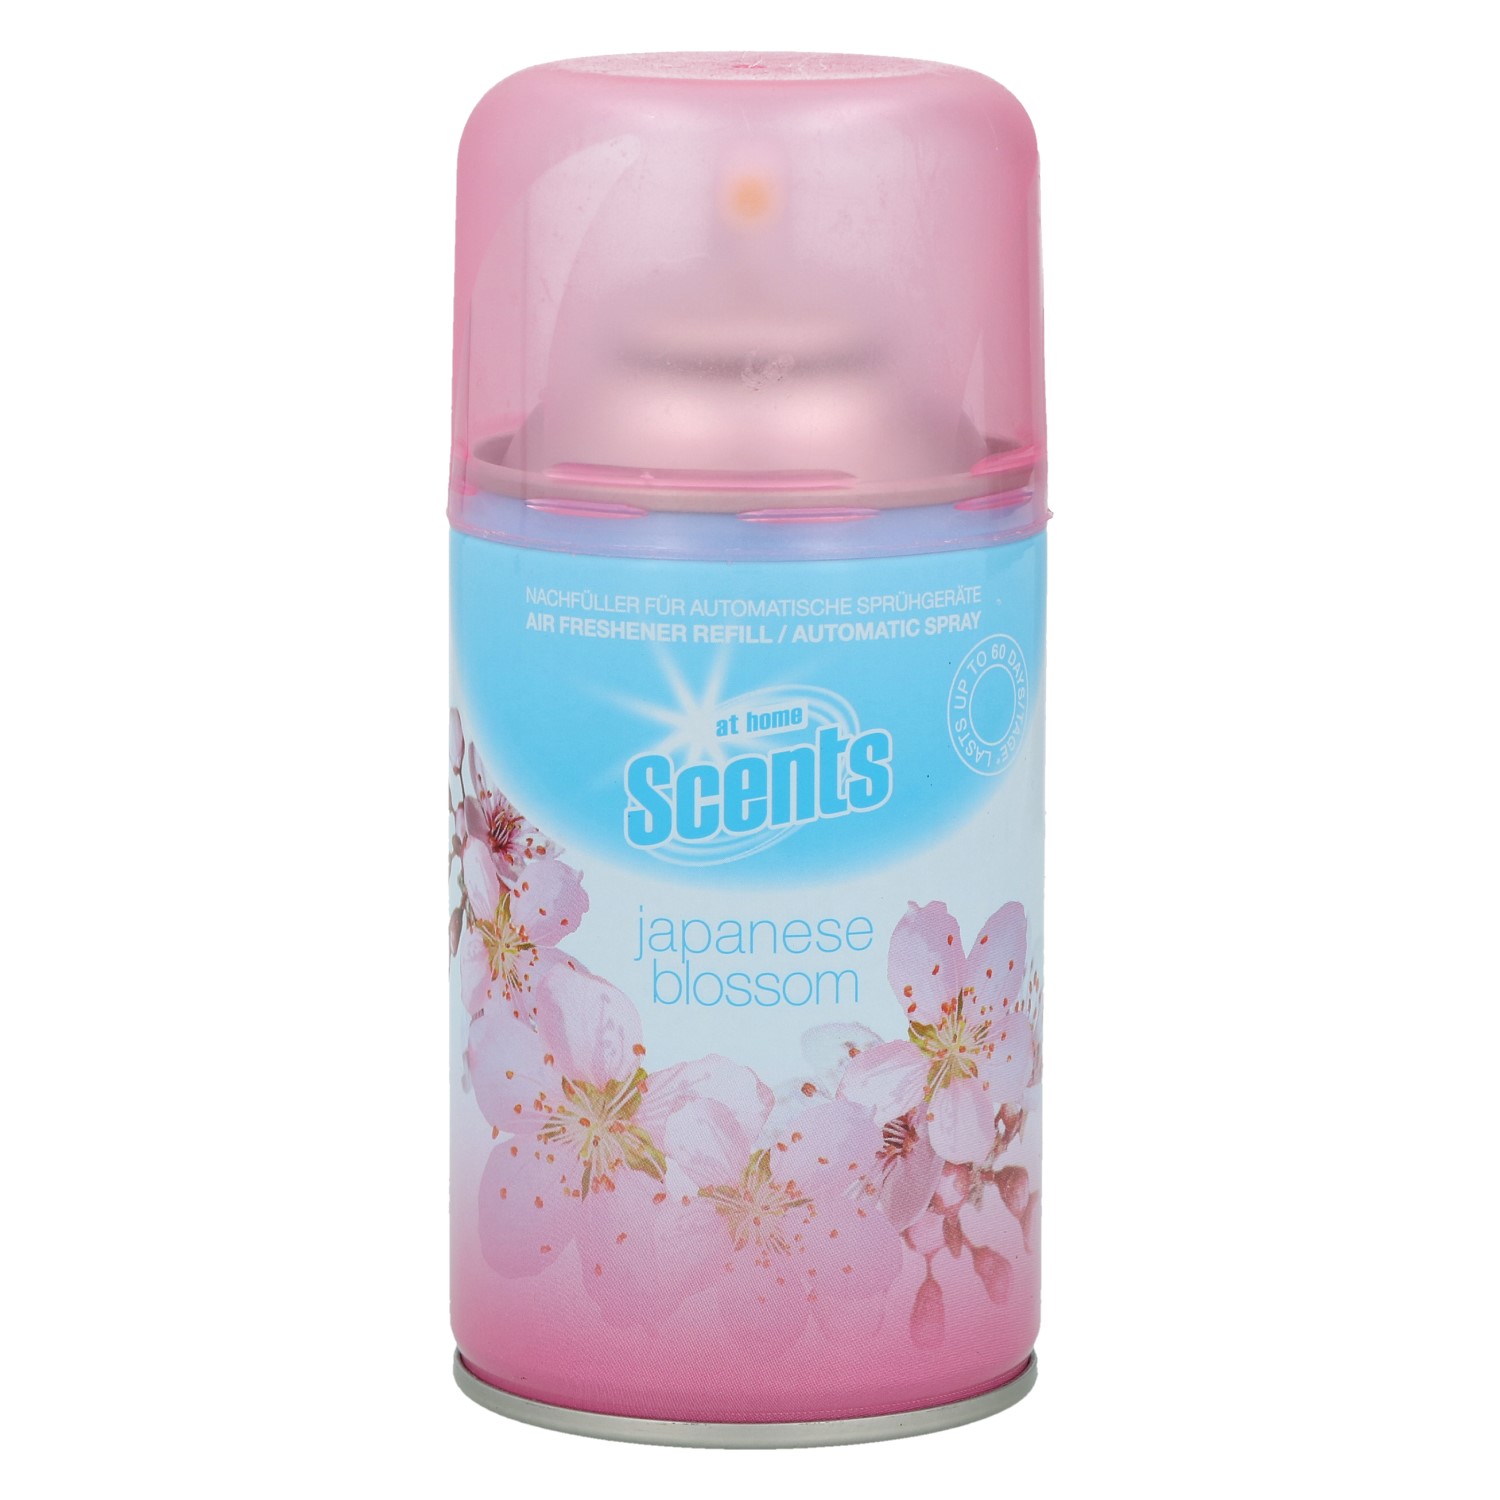 At Home Scents Air freshener refill bottle 250ml